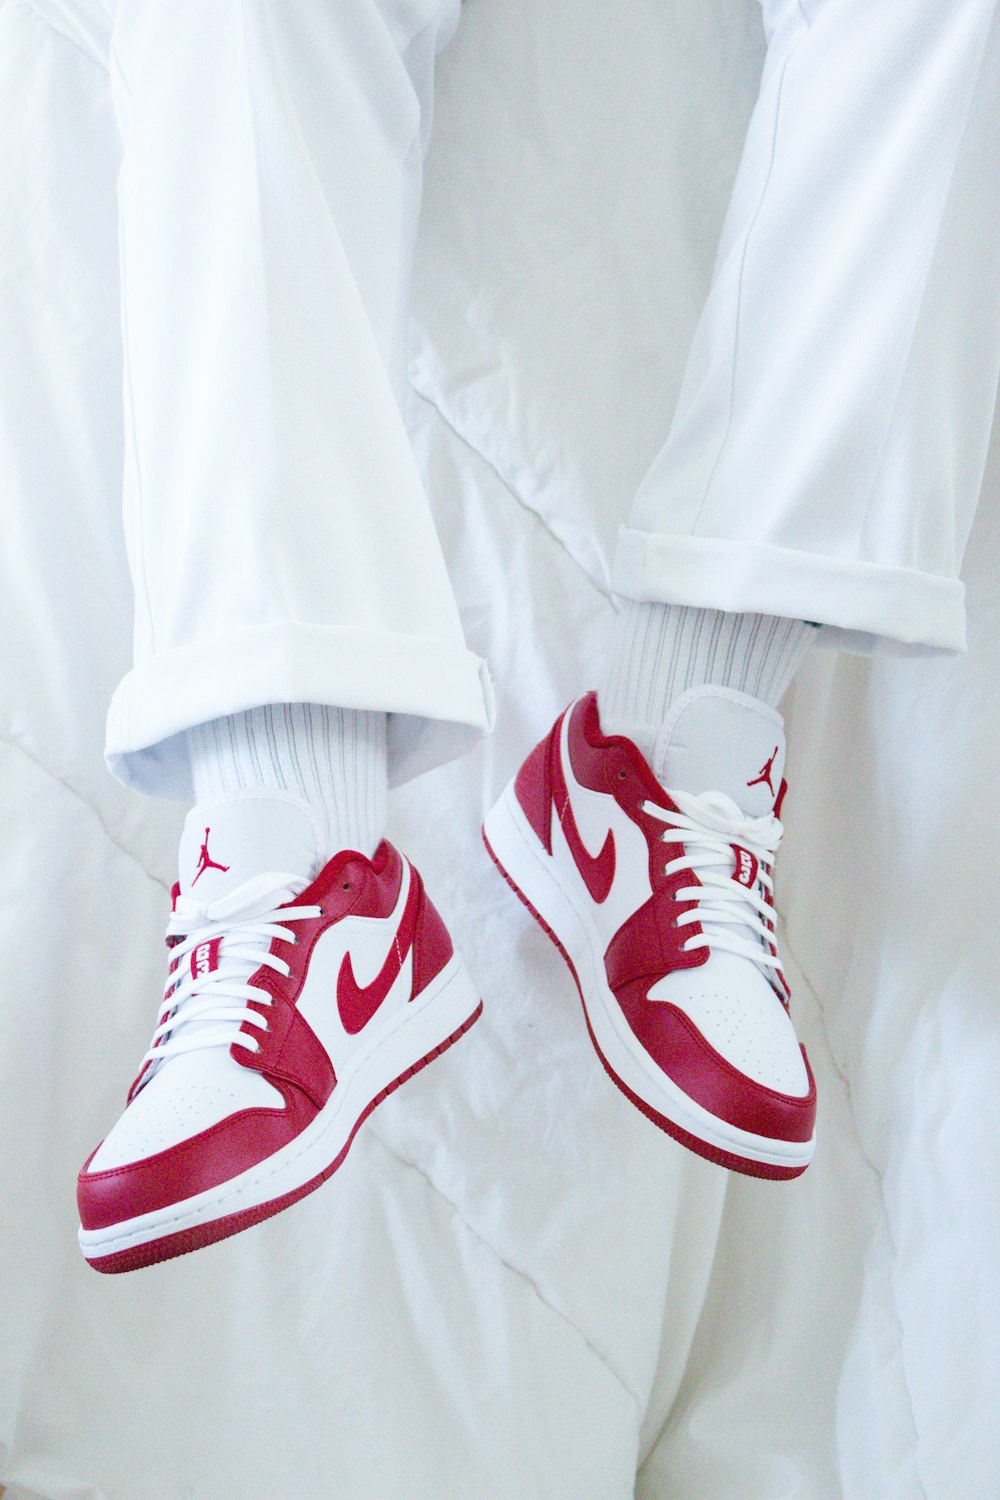 Red and white nike sneakers photo – Free Lyon Image on Unsplash